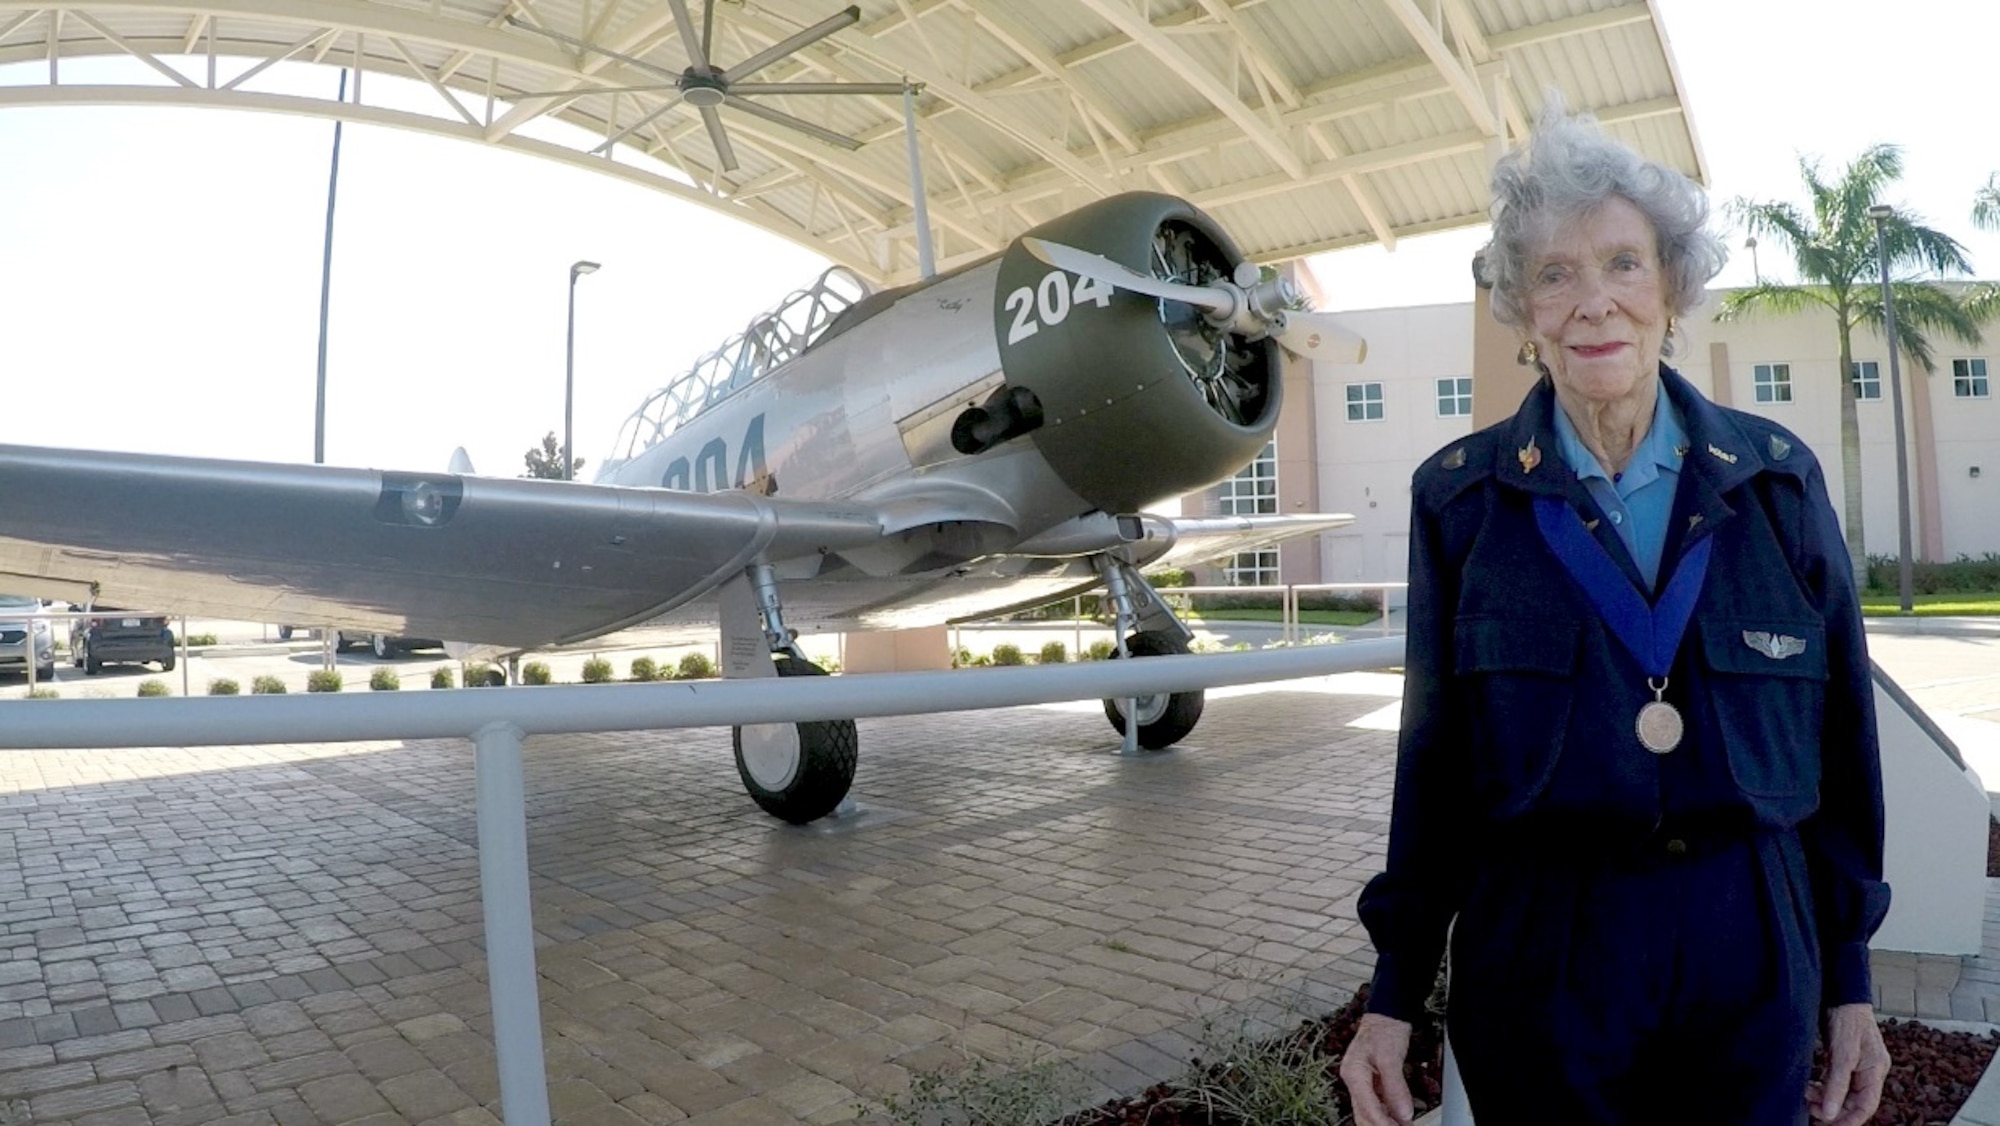 Bernie “Bee” Haydu served as a pilot in the Women Air Force Service Pilots and when the WASP program was disbanded in 1944, it left the female pilots without rank or benefits for their time served.